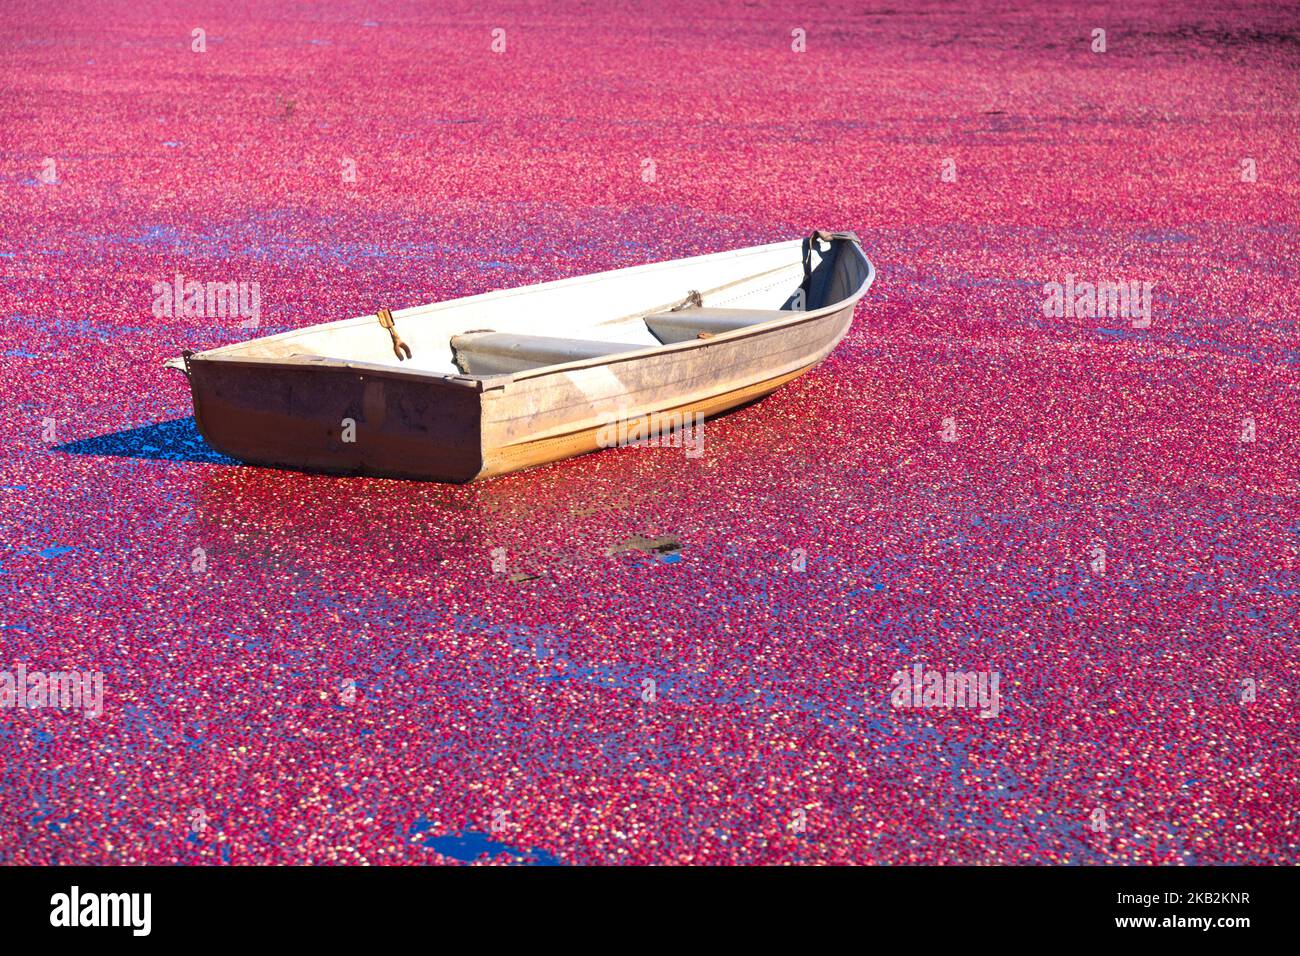 Cranberry Harvest in West Yarmouth, Massachusetts (USA) on Cape Cod. A rowboat amongst a sea of cranberries Stock Photo